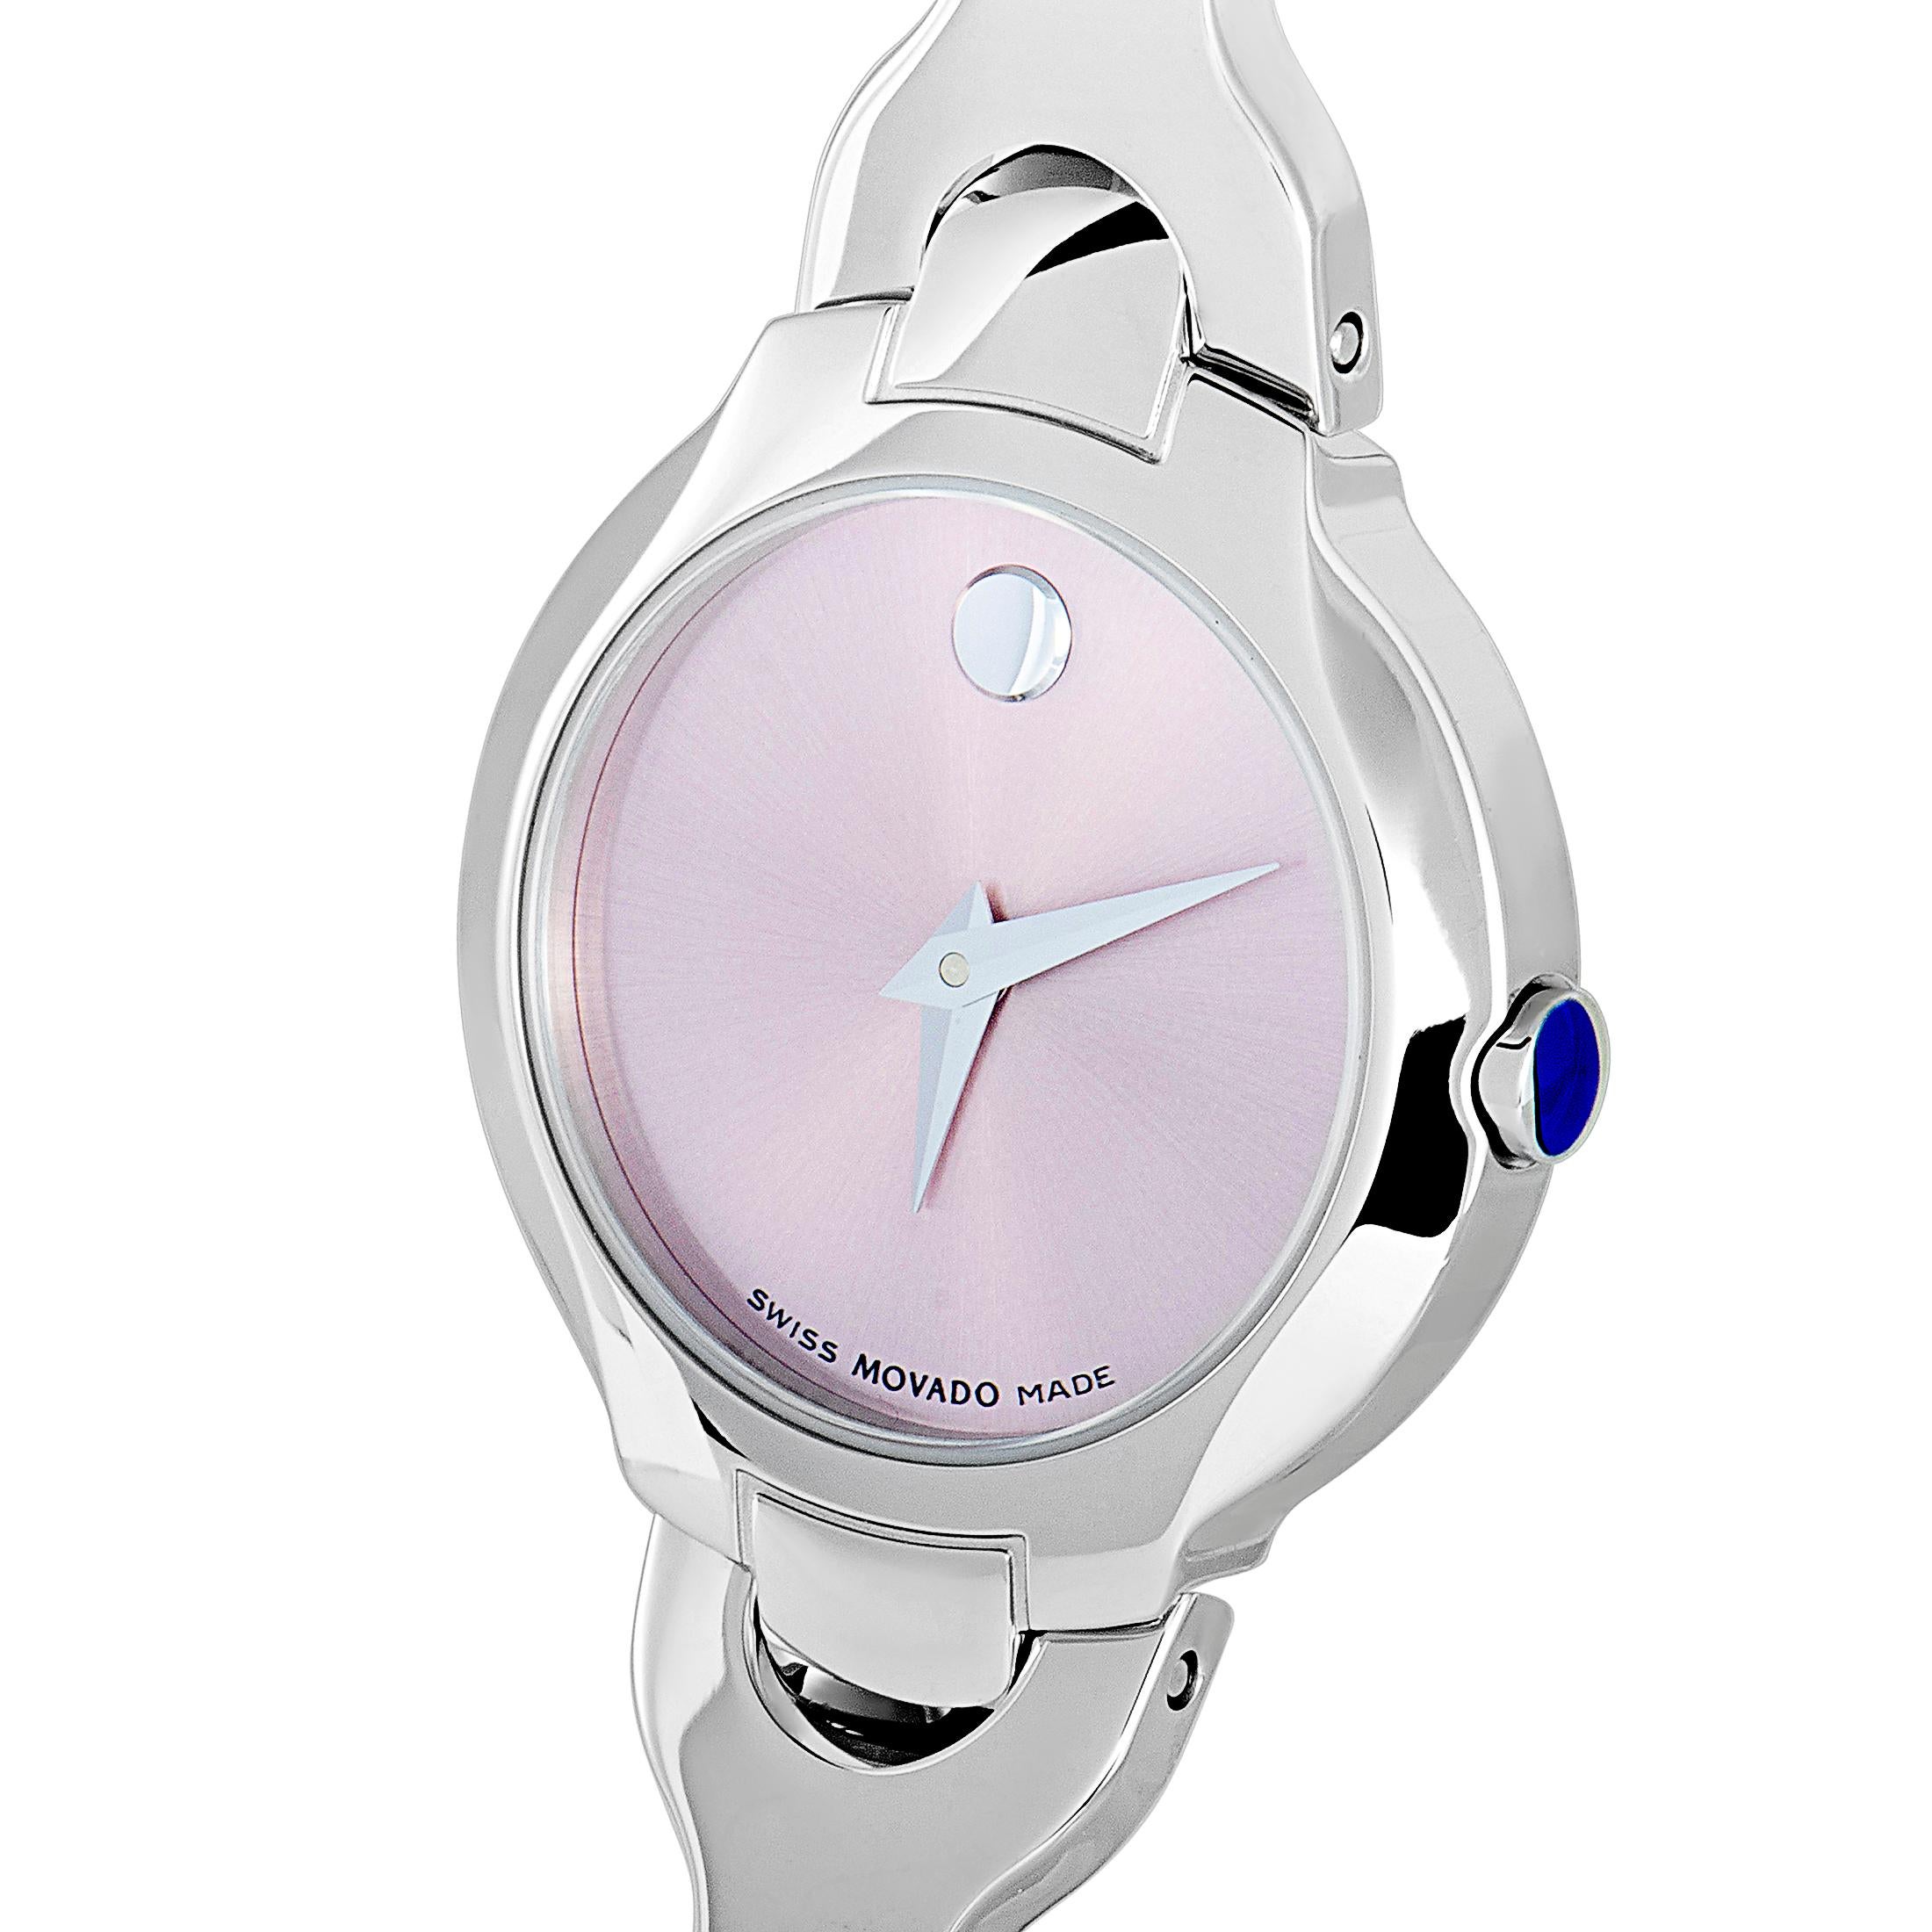 The Kara watch by Movado, reference number 0605284, is powered by a quartz movement and indicates hours and minutes on the pink dial. The watch boasts a case made of stainless steel that is presented on a matching stainless steel bracelet.
Retail